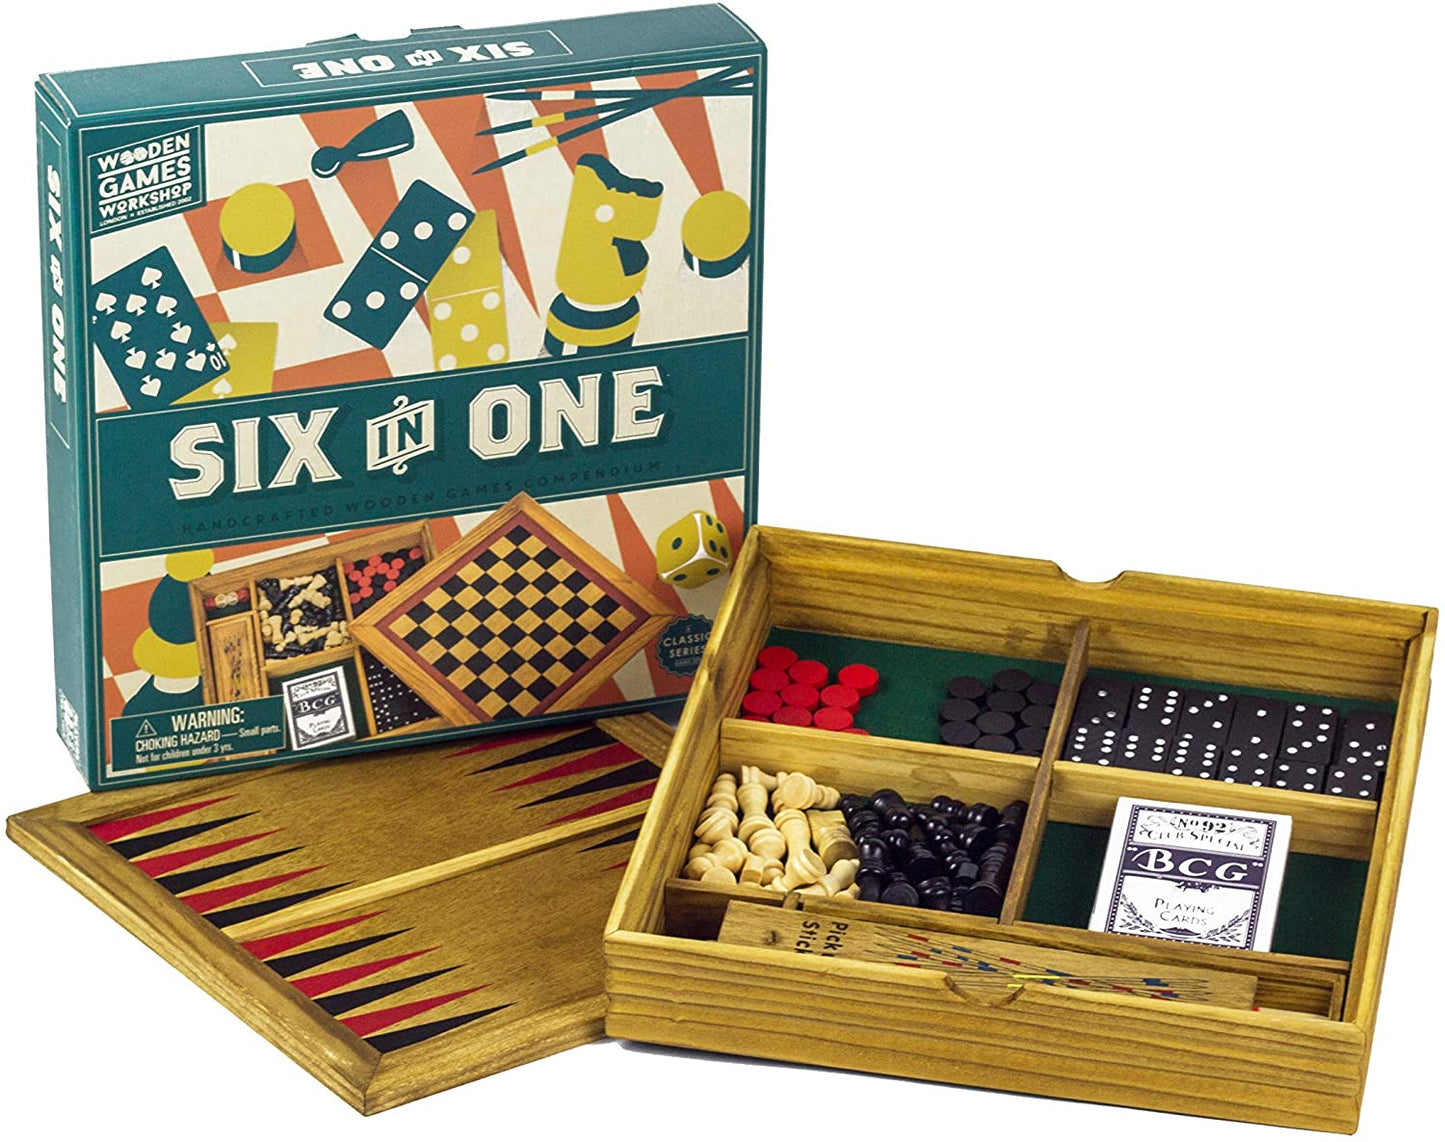 SIX IN ONE WOODEN GAMES COMPENDIUM